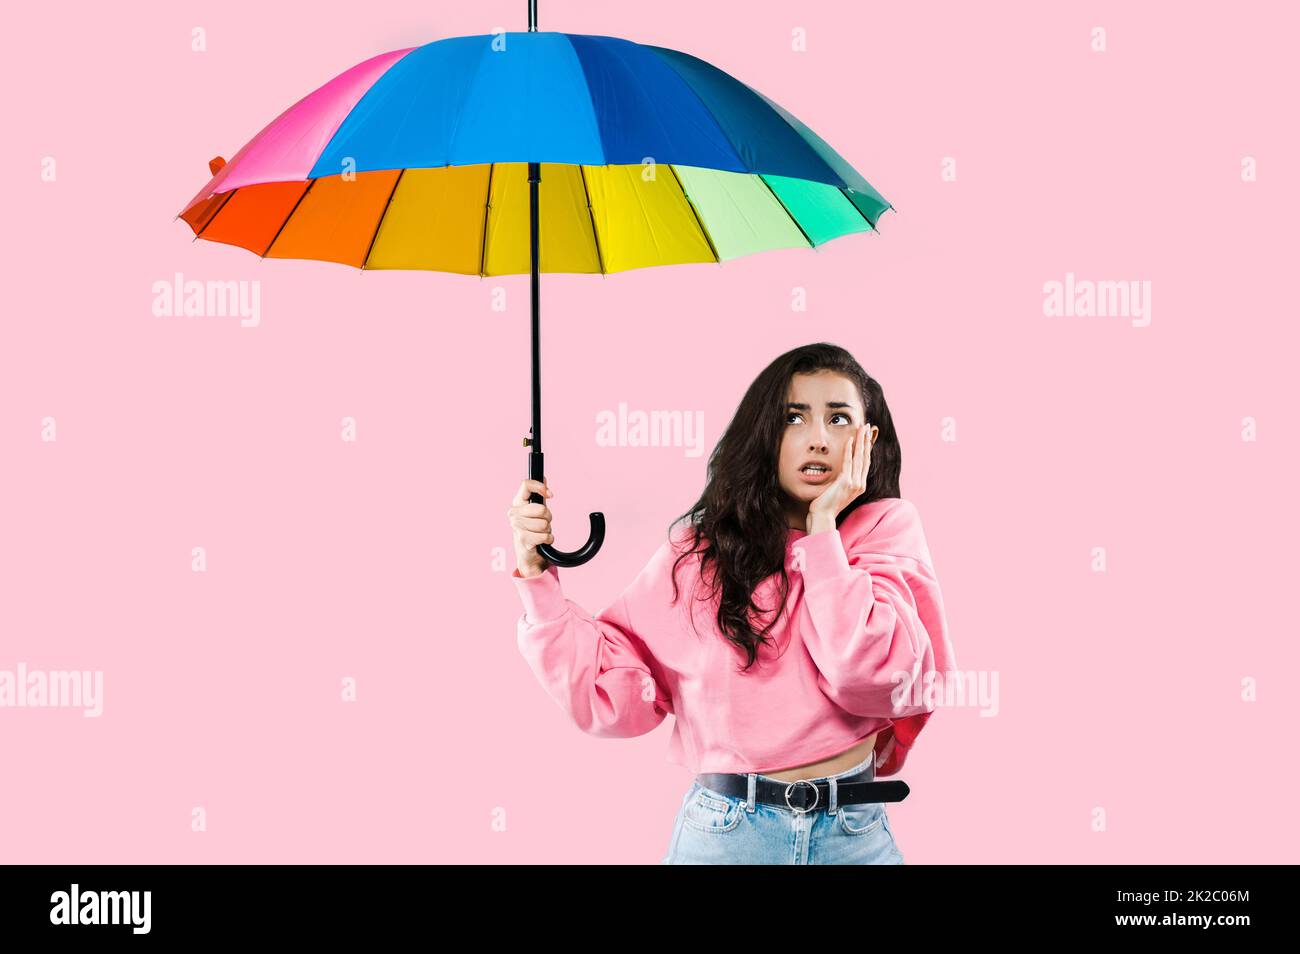 Worried caucasian upset young woman, stylishly dressed, holding an open rainbow umbrella in her hand, looking up, waiting for rain, standing over isolated pink background Stock Photo